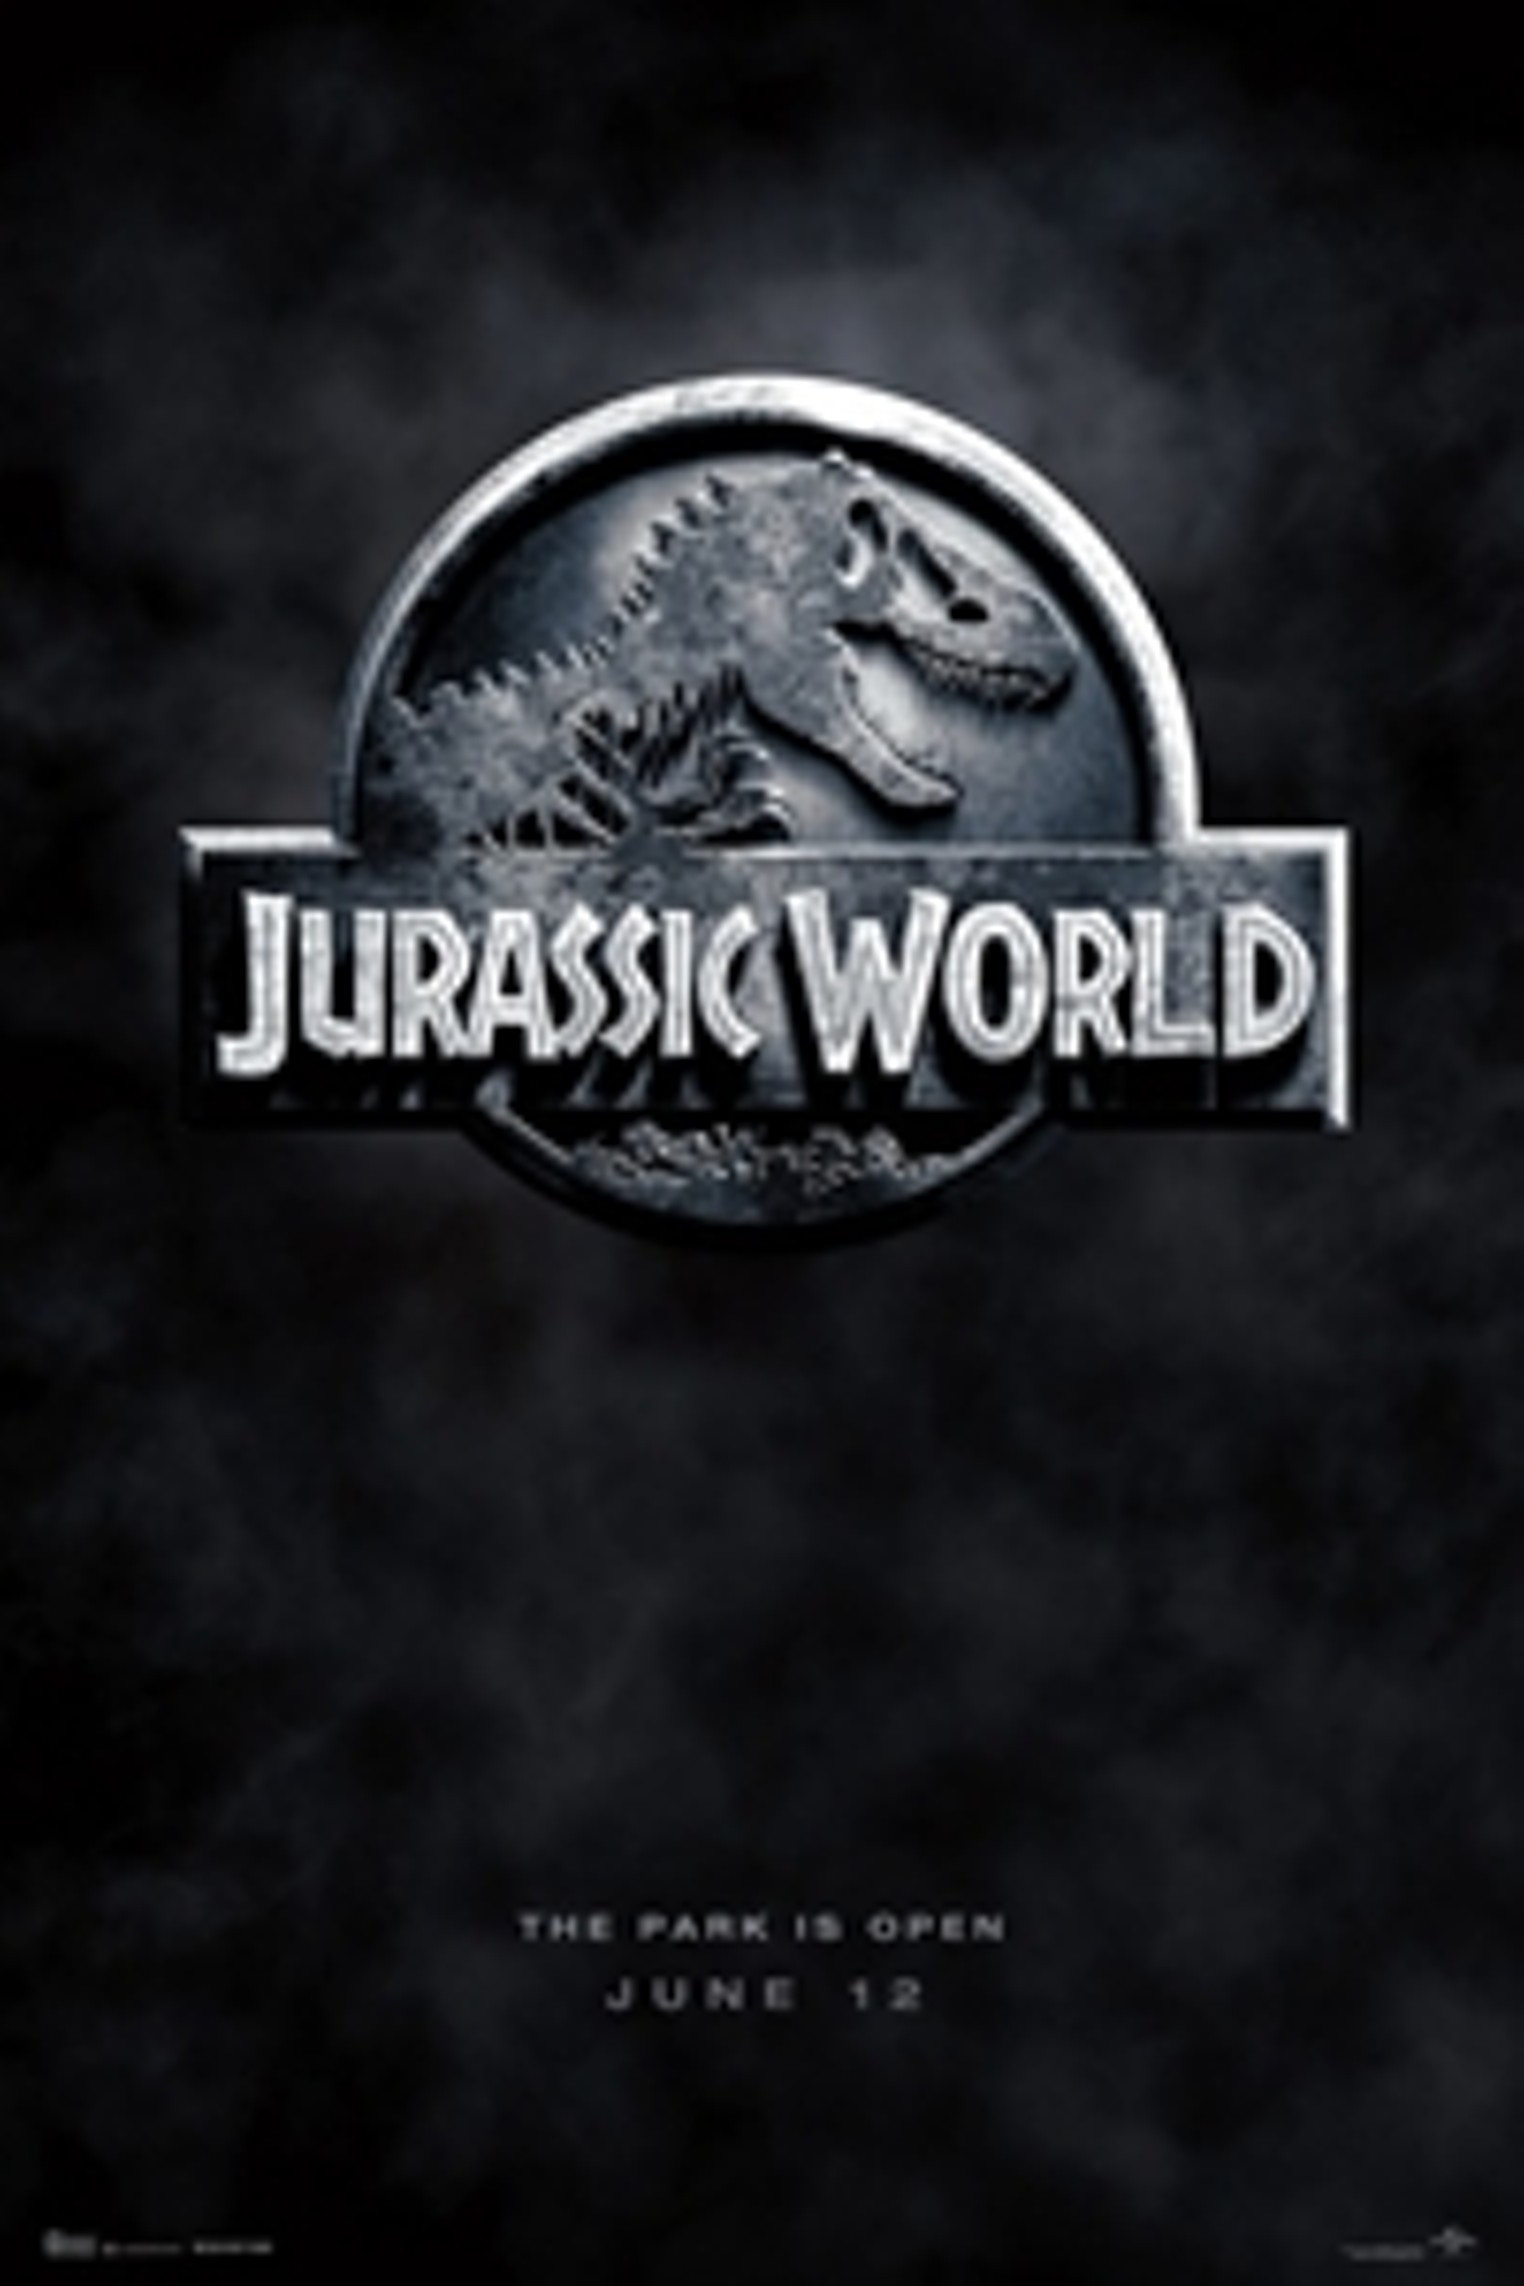 Jurassic World Miami New Times The Leading Independent News Source